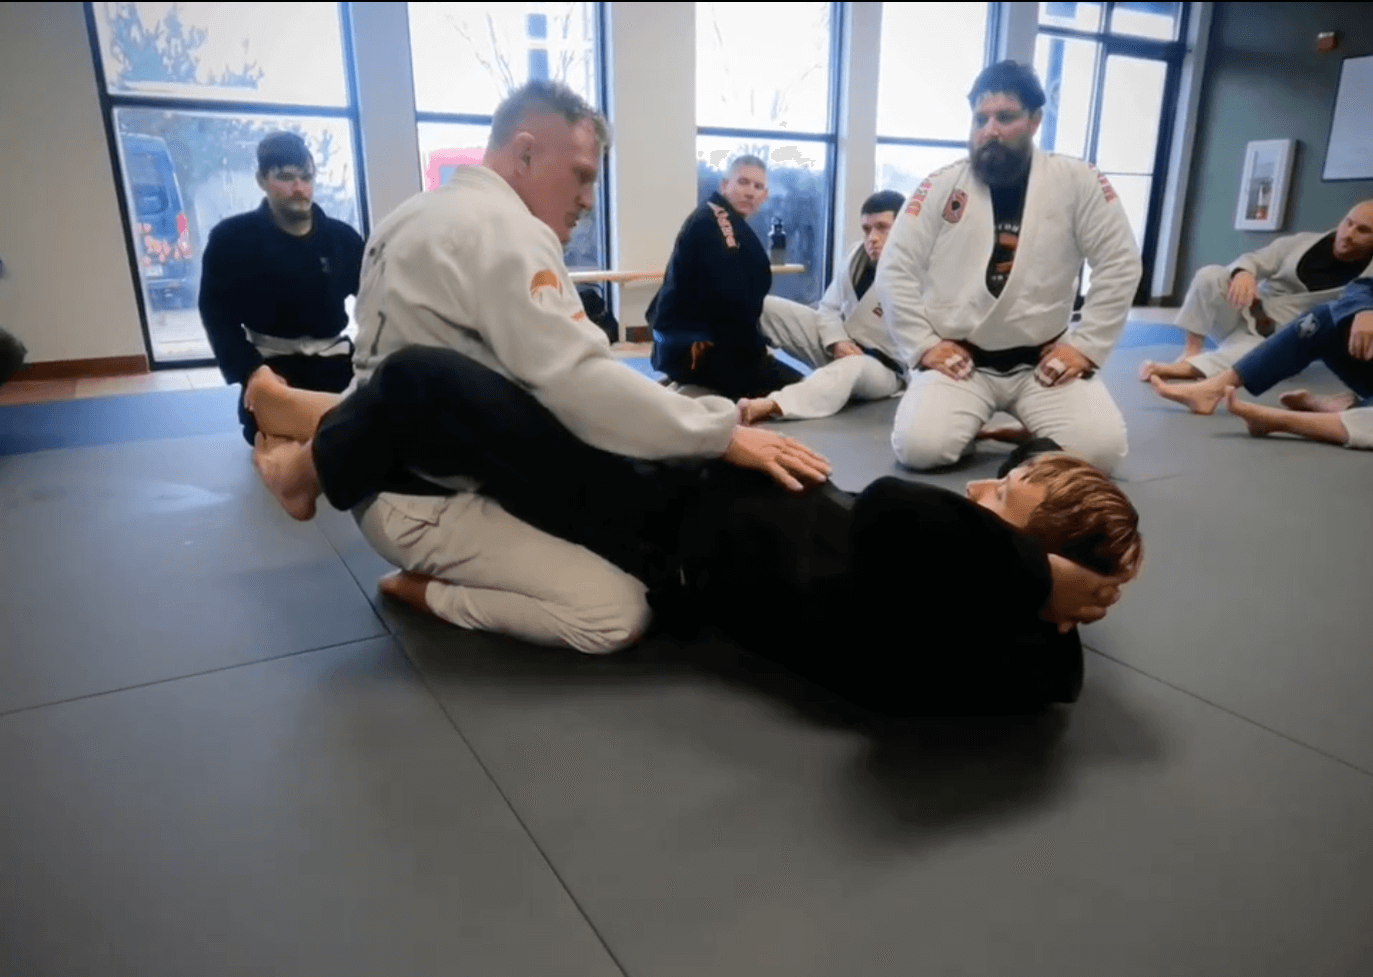 Featured image for “Seminar at Stoughton BJJ”